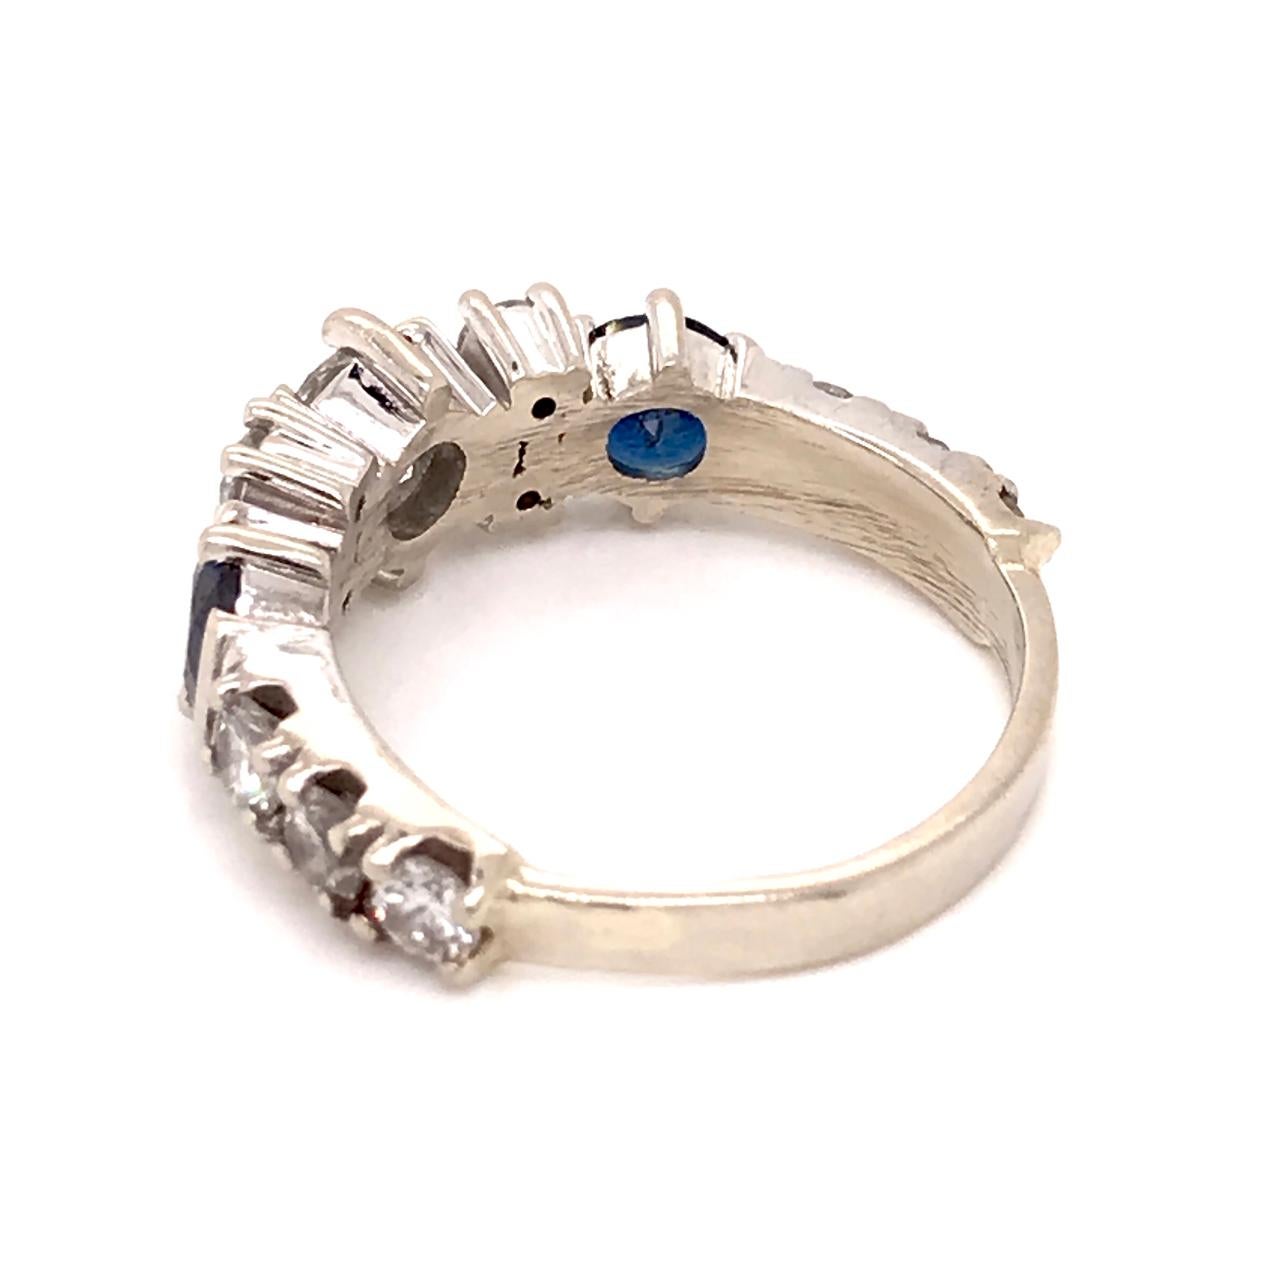 Vintage 14k White Gold, Diamond, & Sapphire Art Deco Style Cocktail Ring For Sale 3